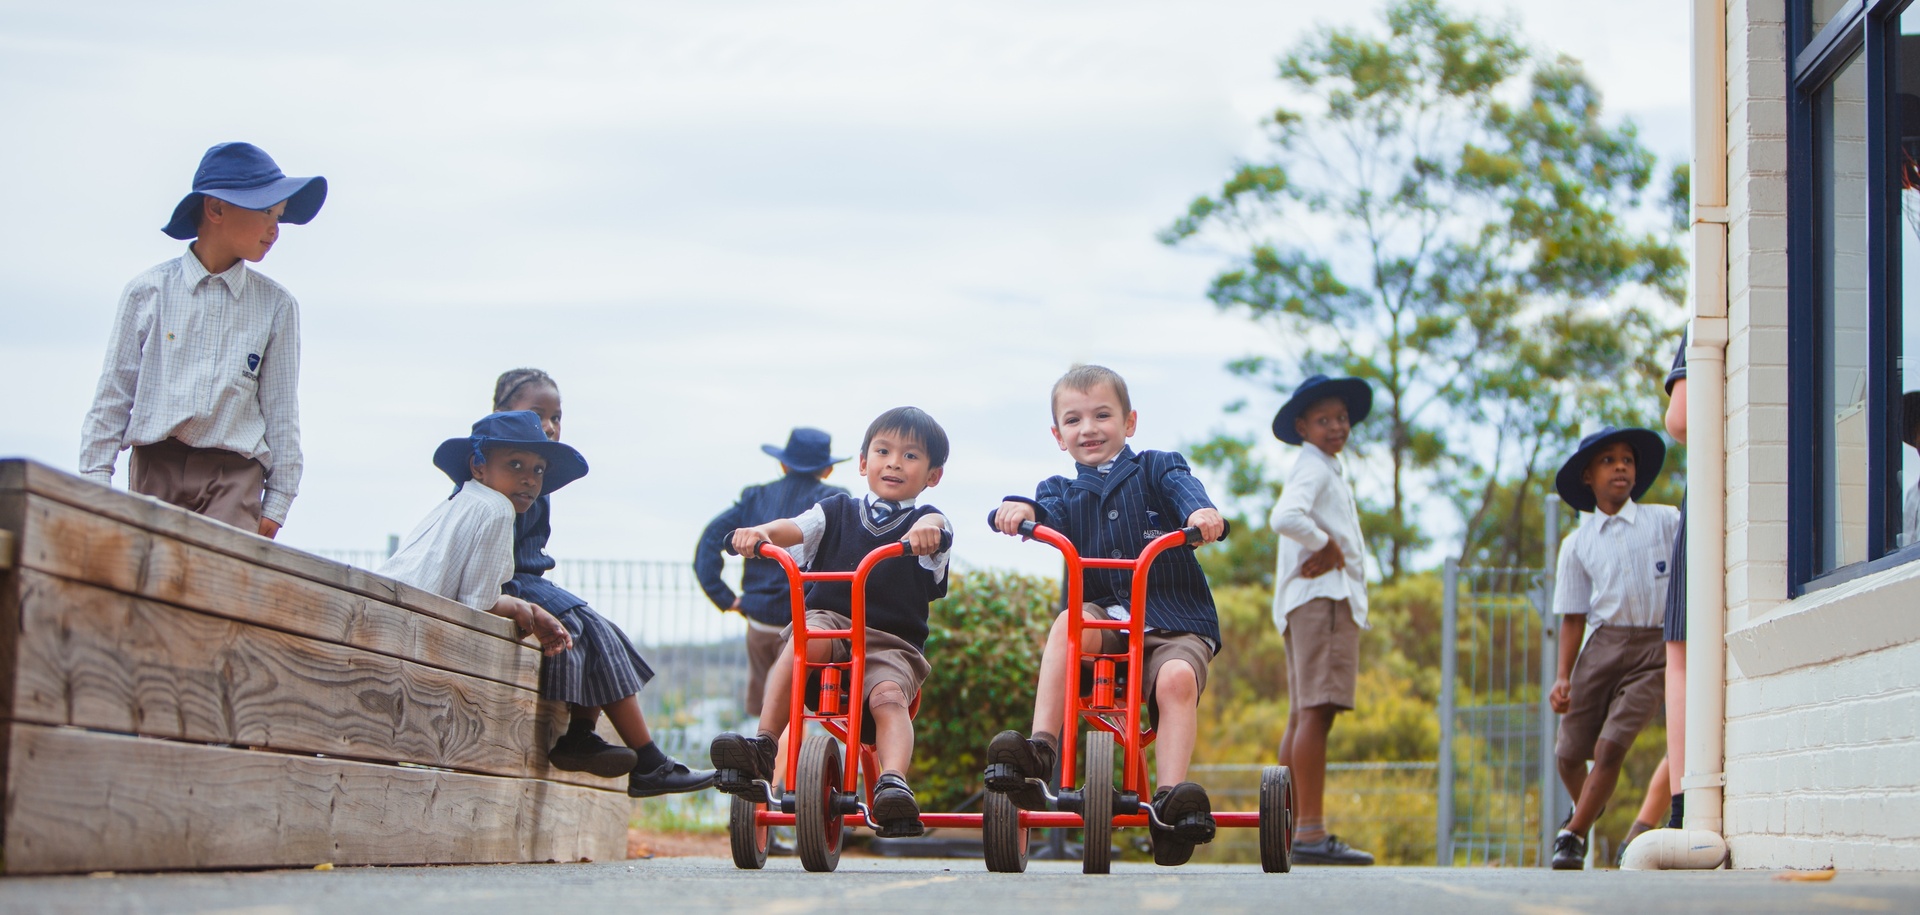 Primary school students in formal uniform riding tricycles around ACC Hobart campus